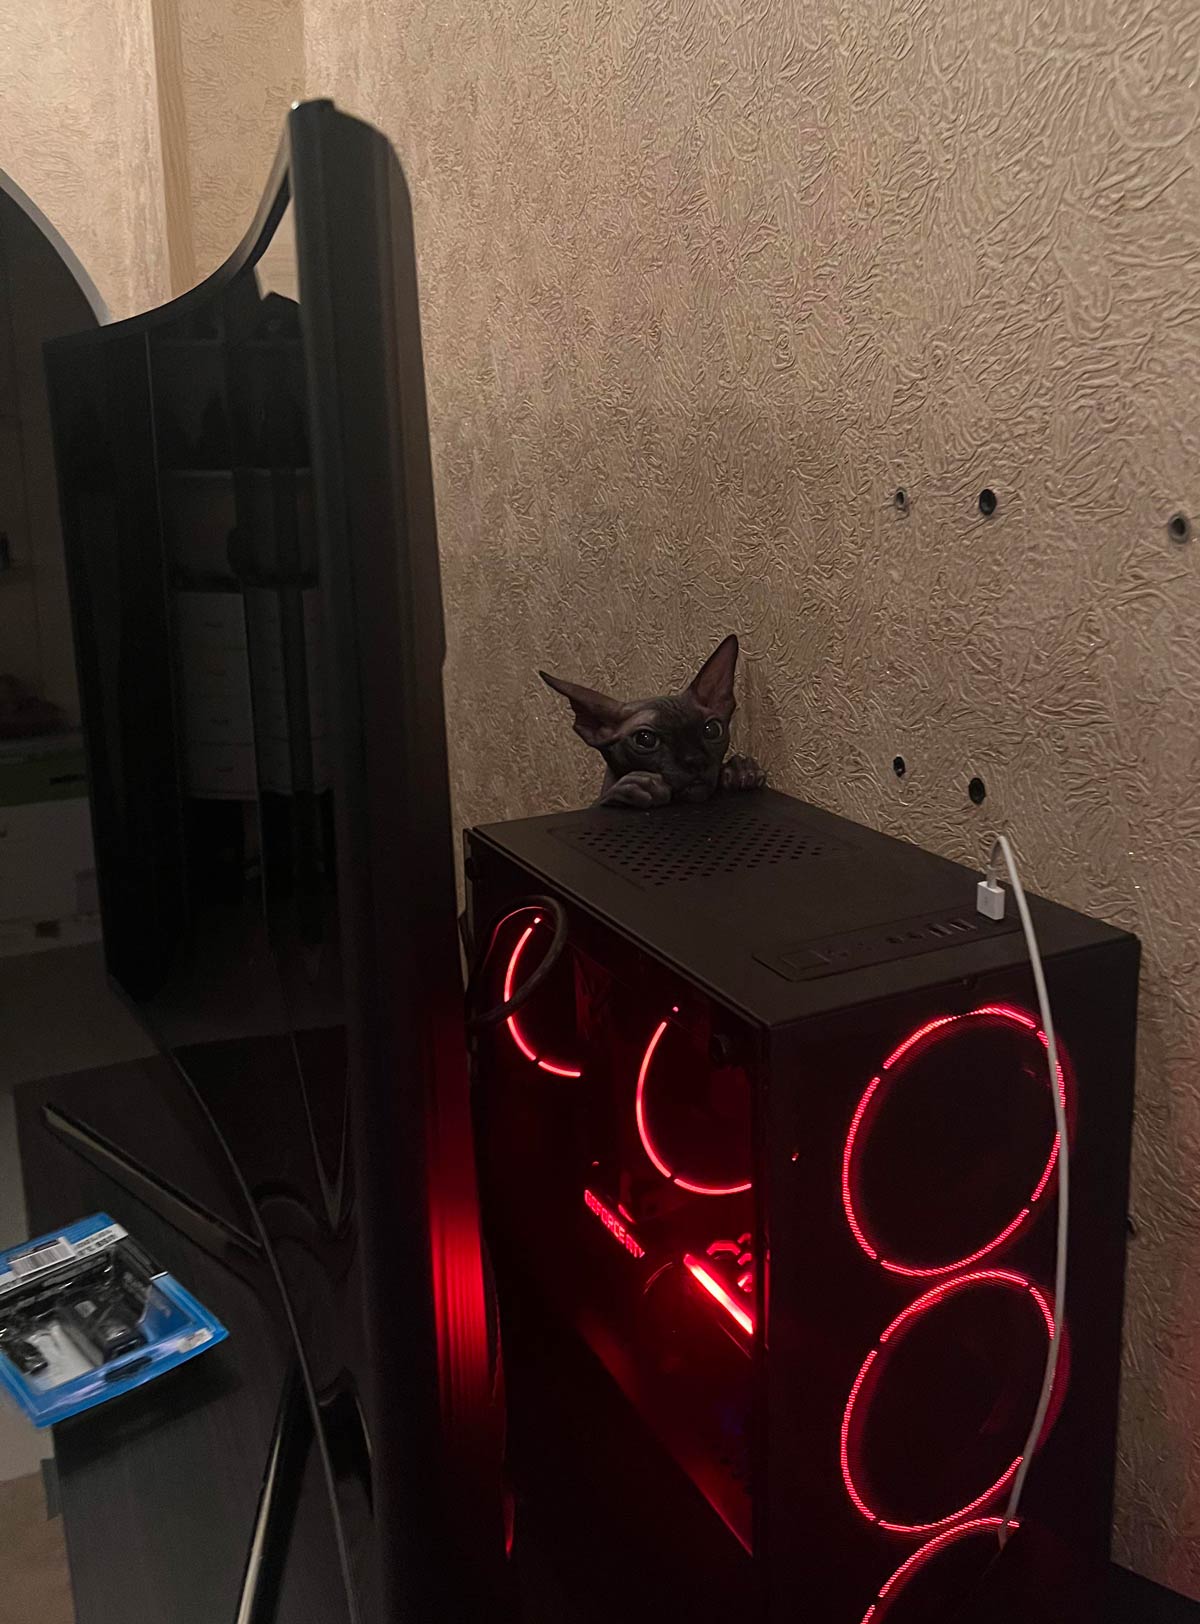 He knows he's not allowed to climb on my PC, but he still tries